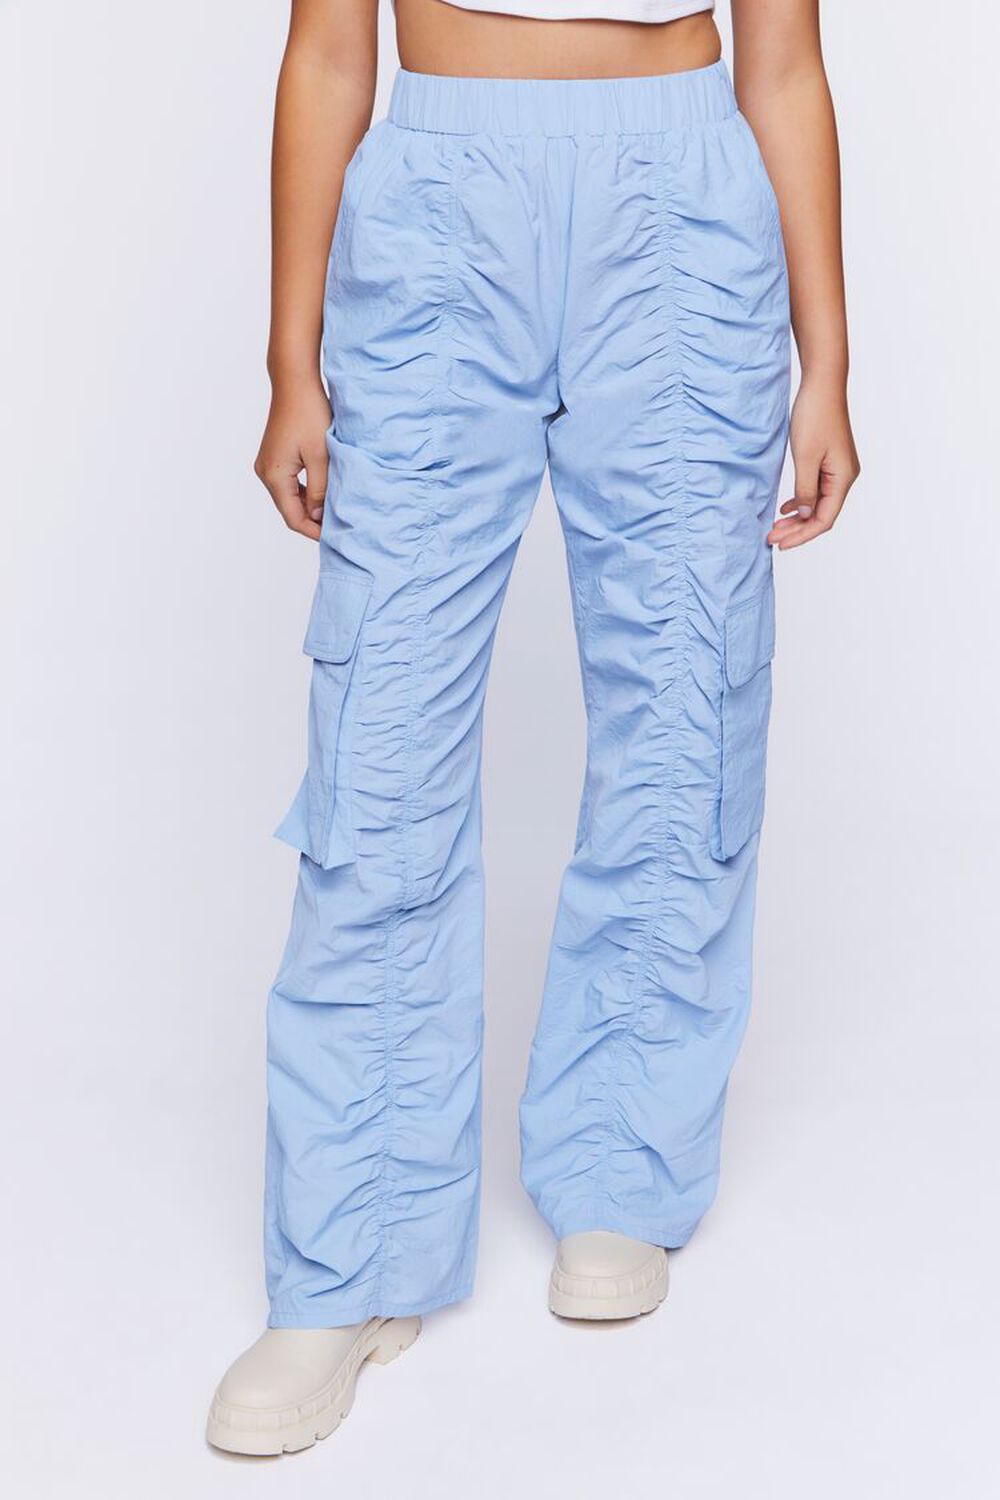 Forever 21 Girls Ruched Cargo Pants (Kids) in Blue, 11/12